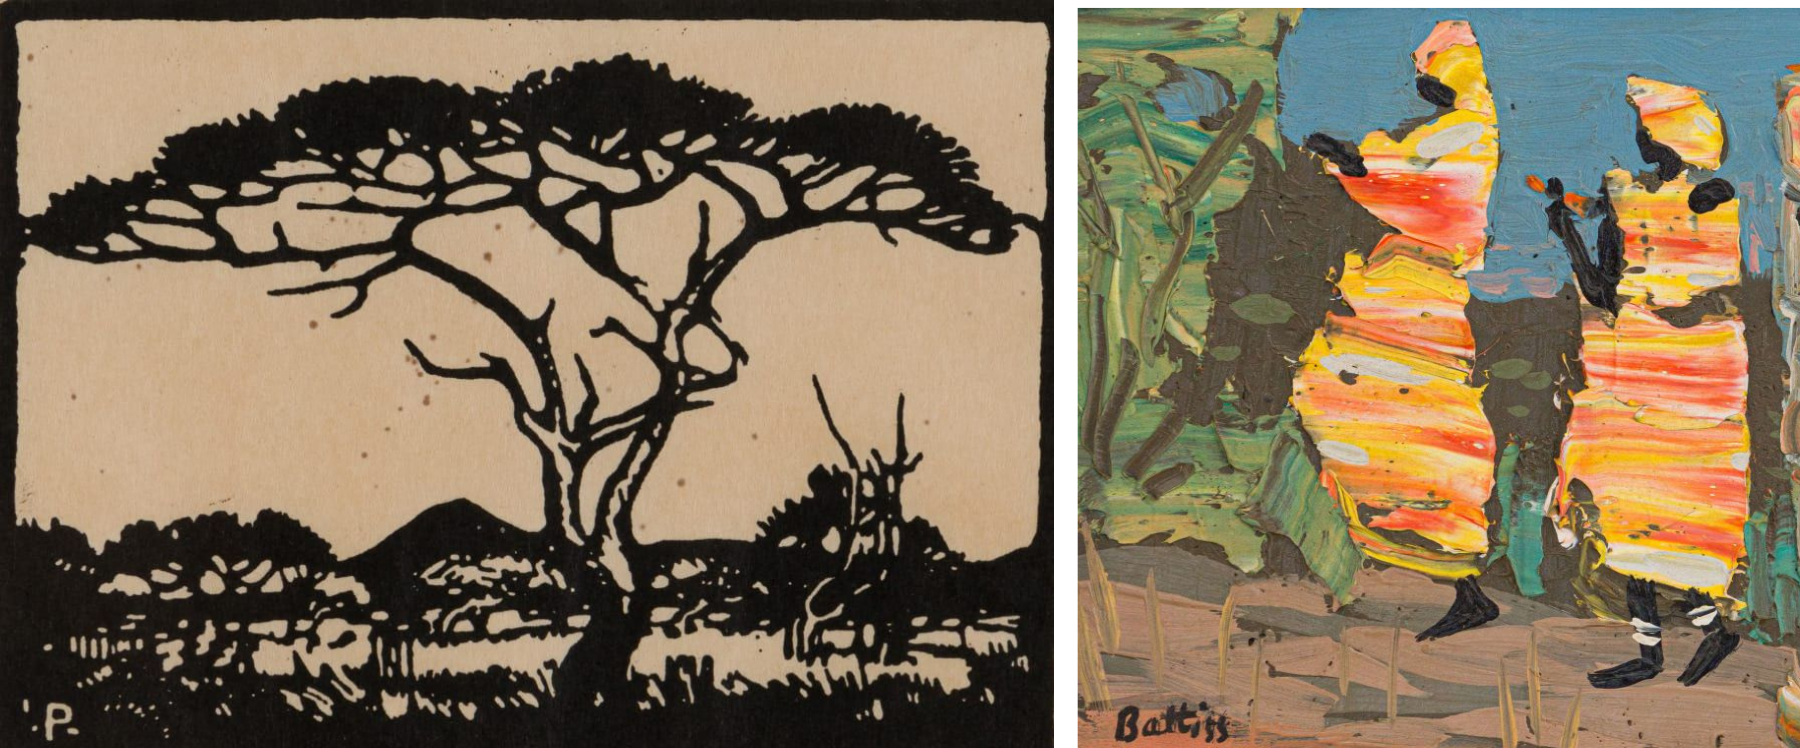 Strauss & Co | Important South African Modernist Artists